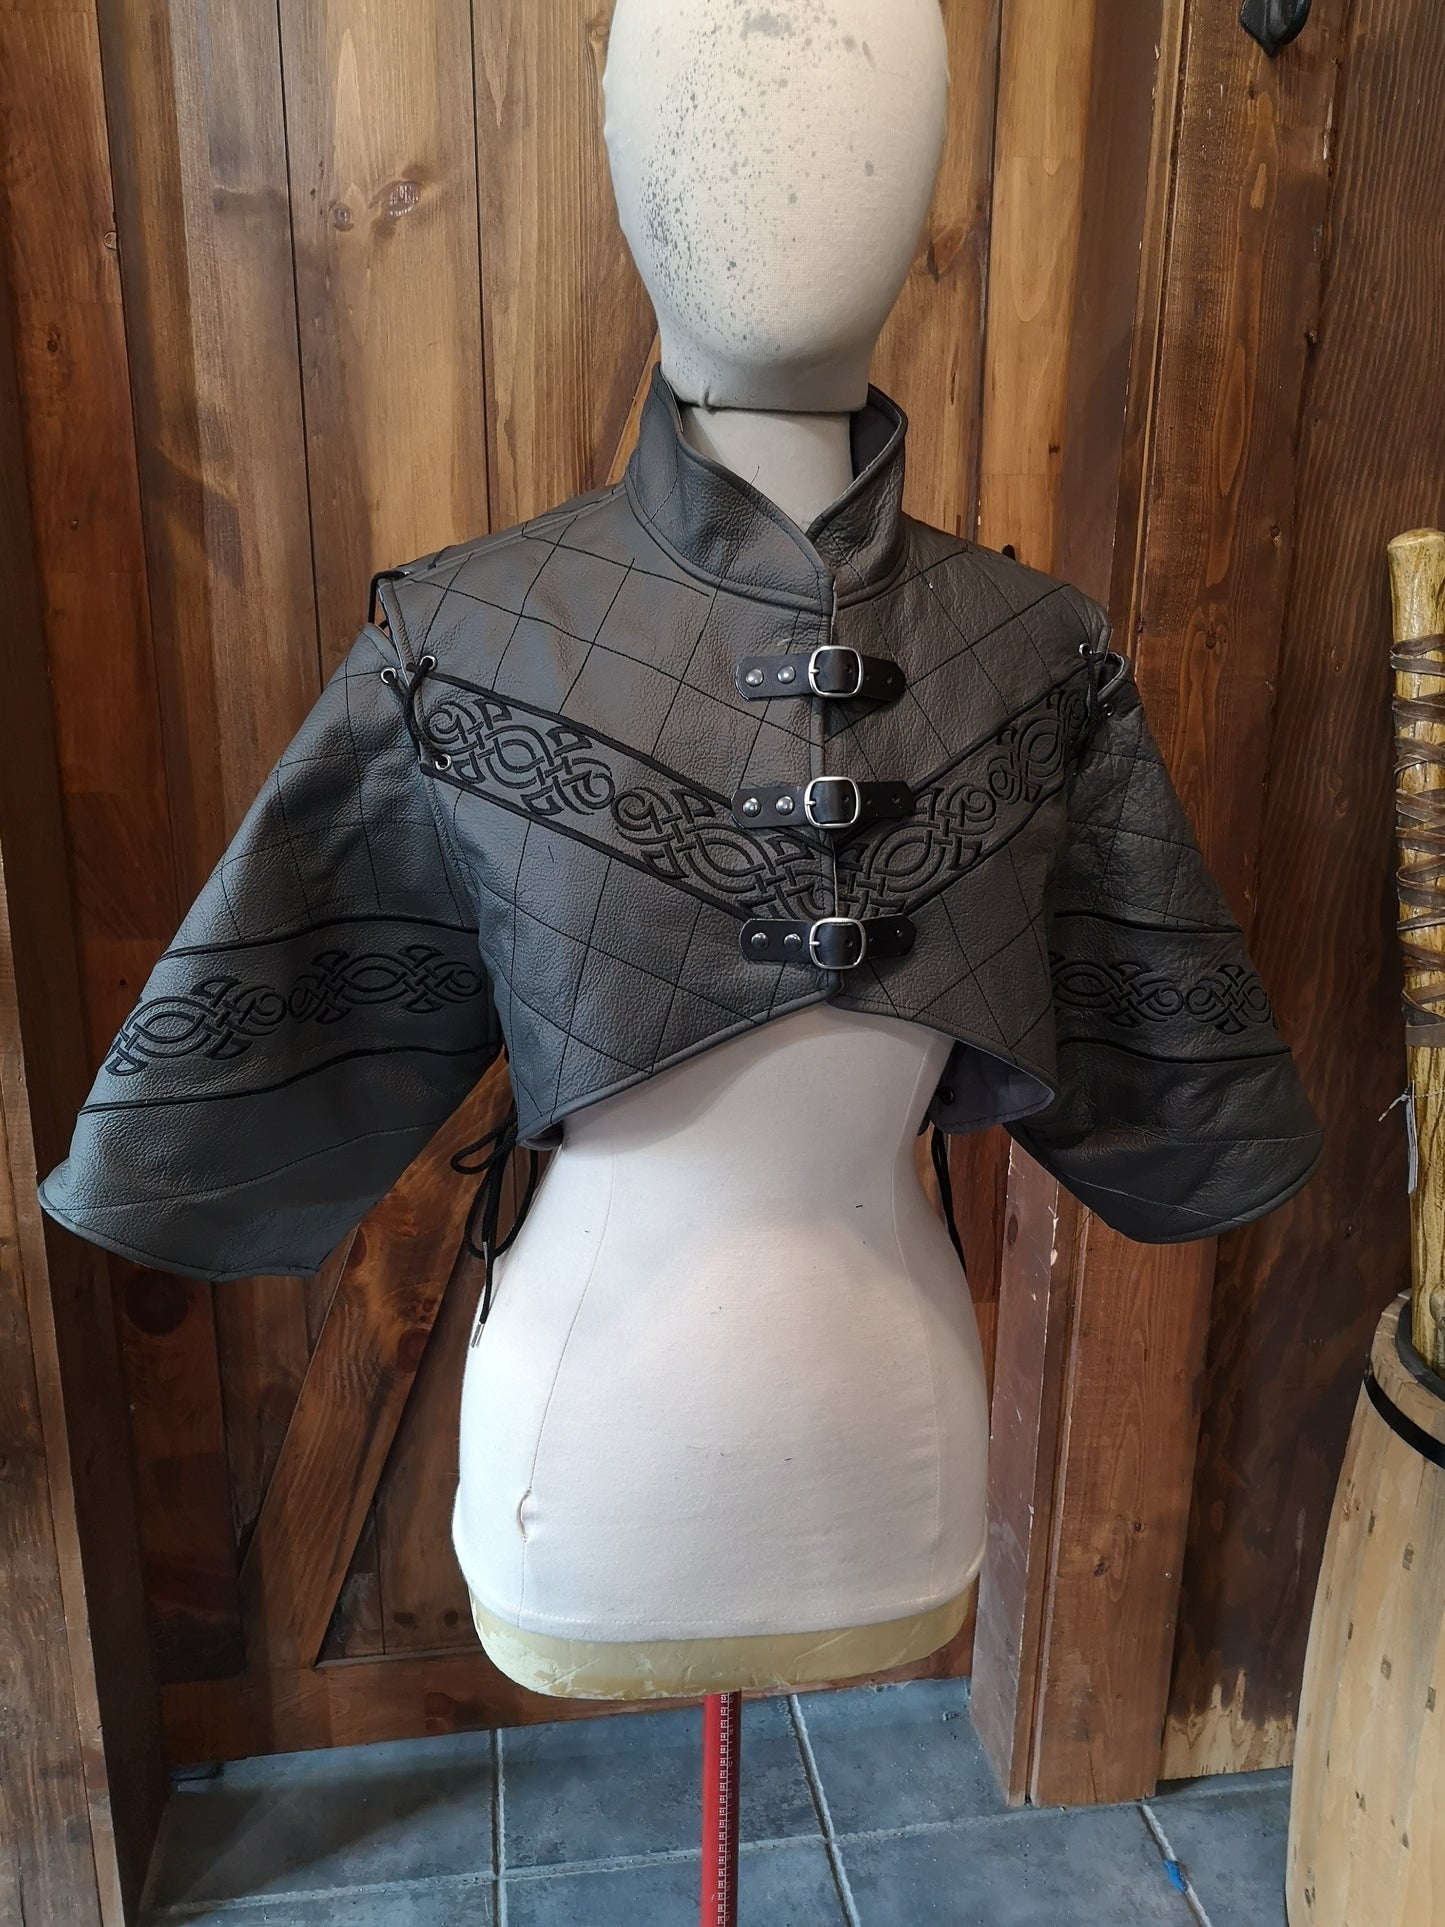 Celtic embroidered leather gambeson